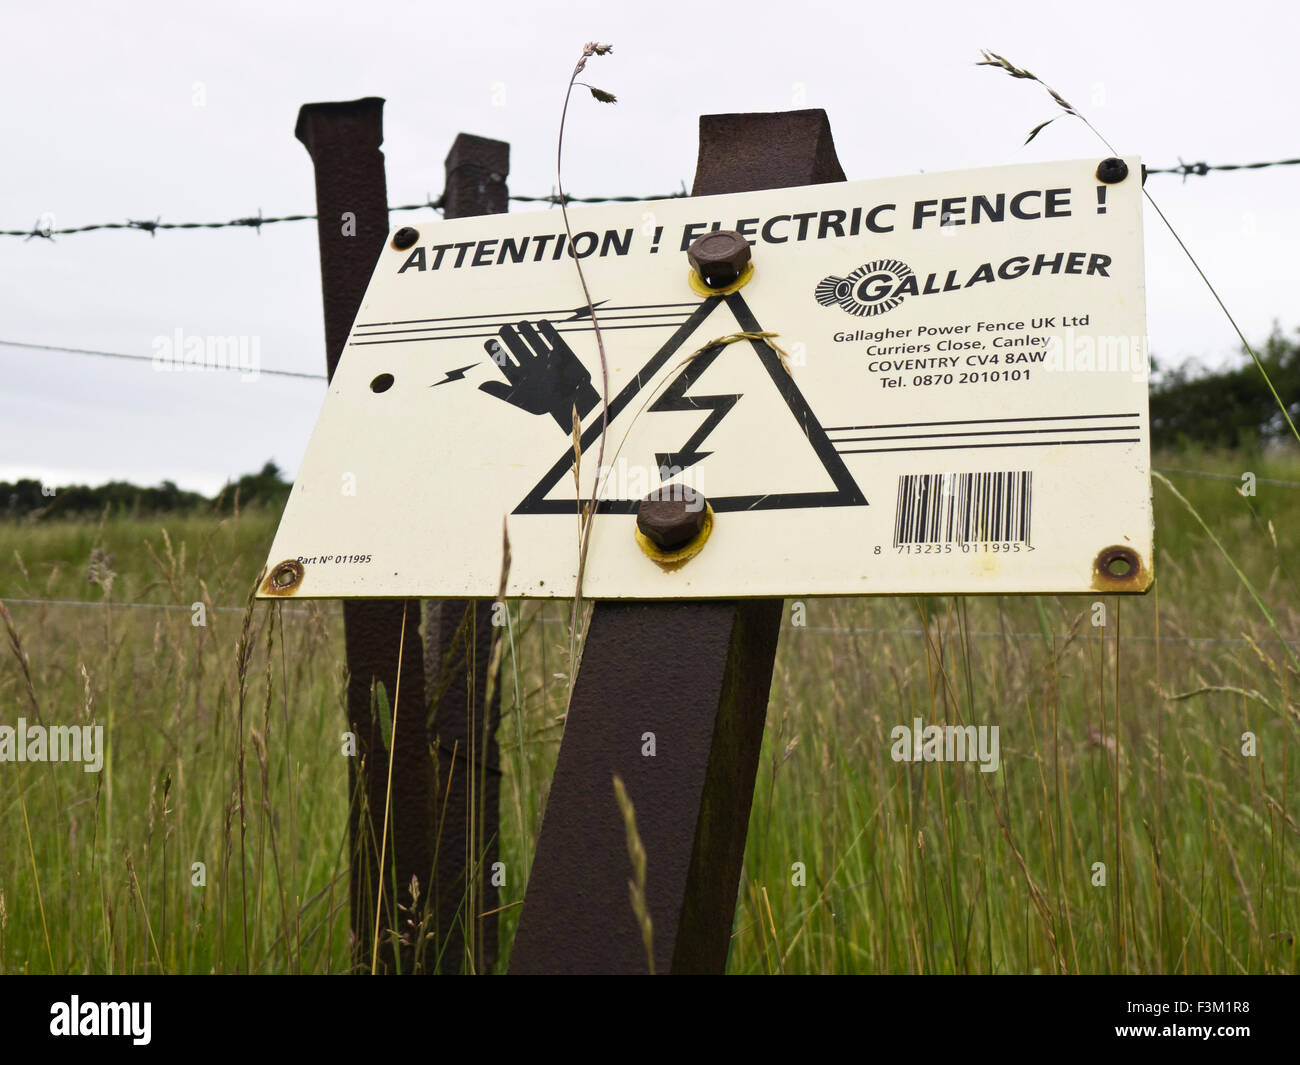 Warning sign for an electric fence. Stock Photo